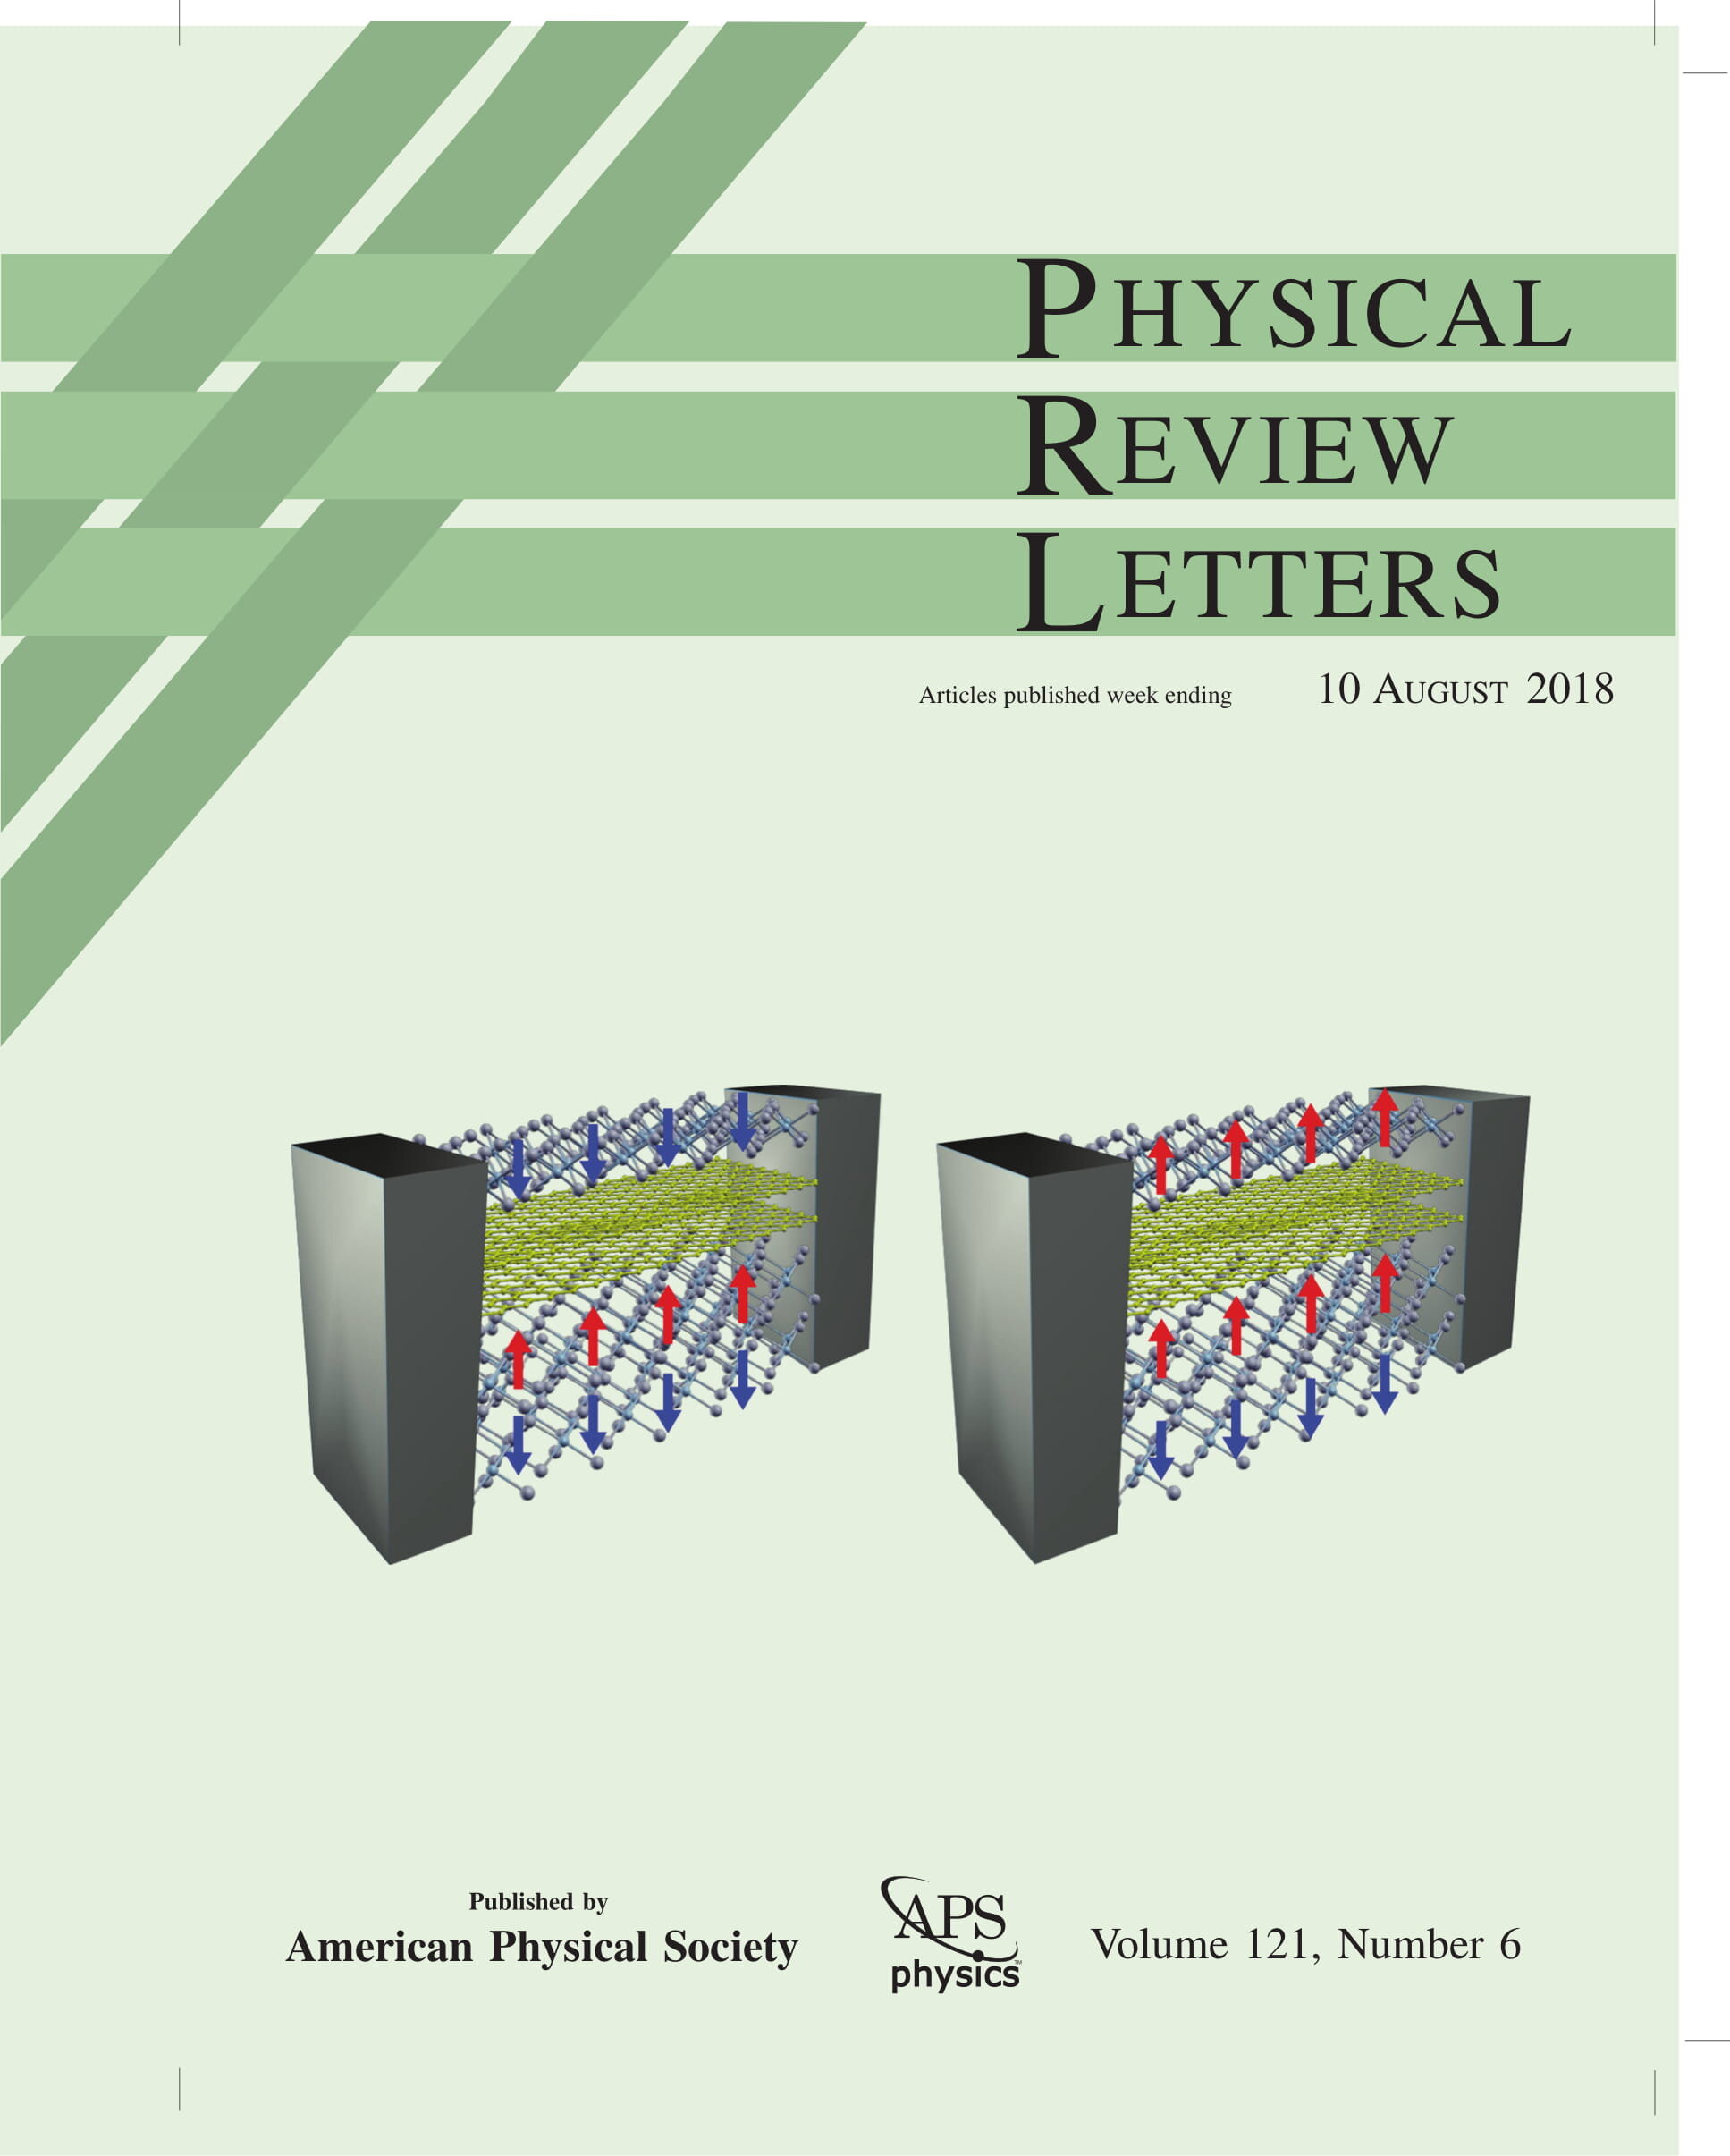 INL research on quantum materials in the cover of top Physics journal